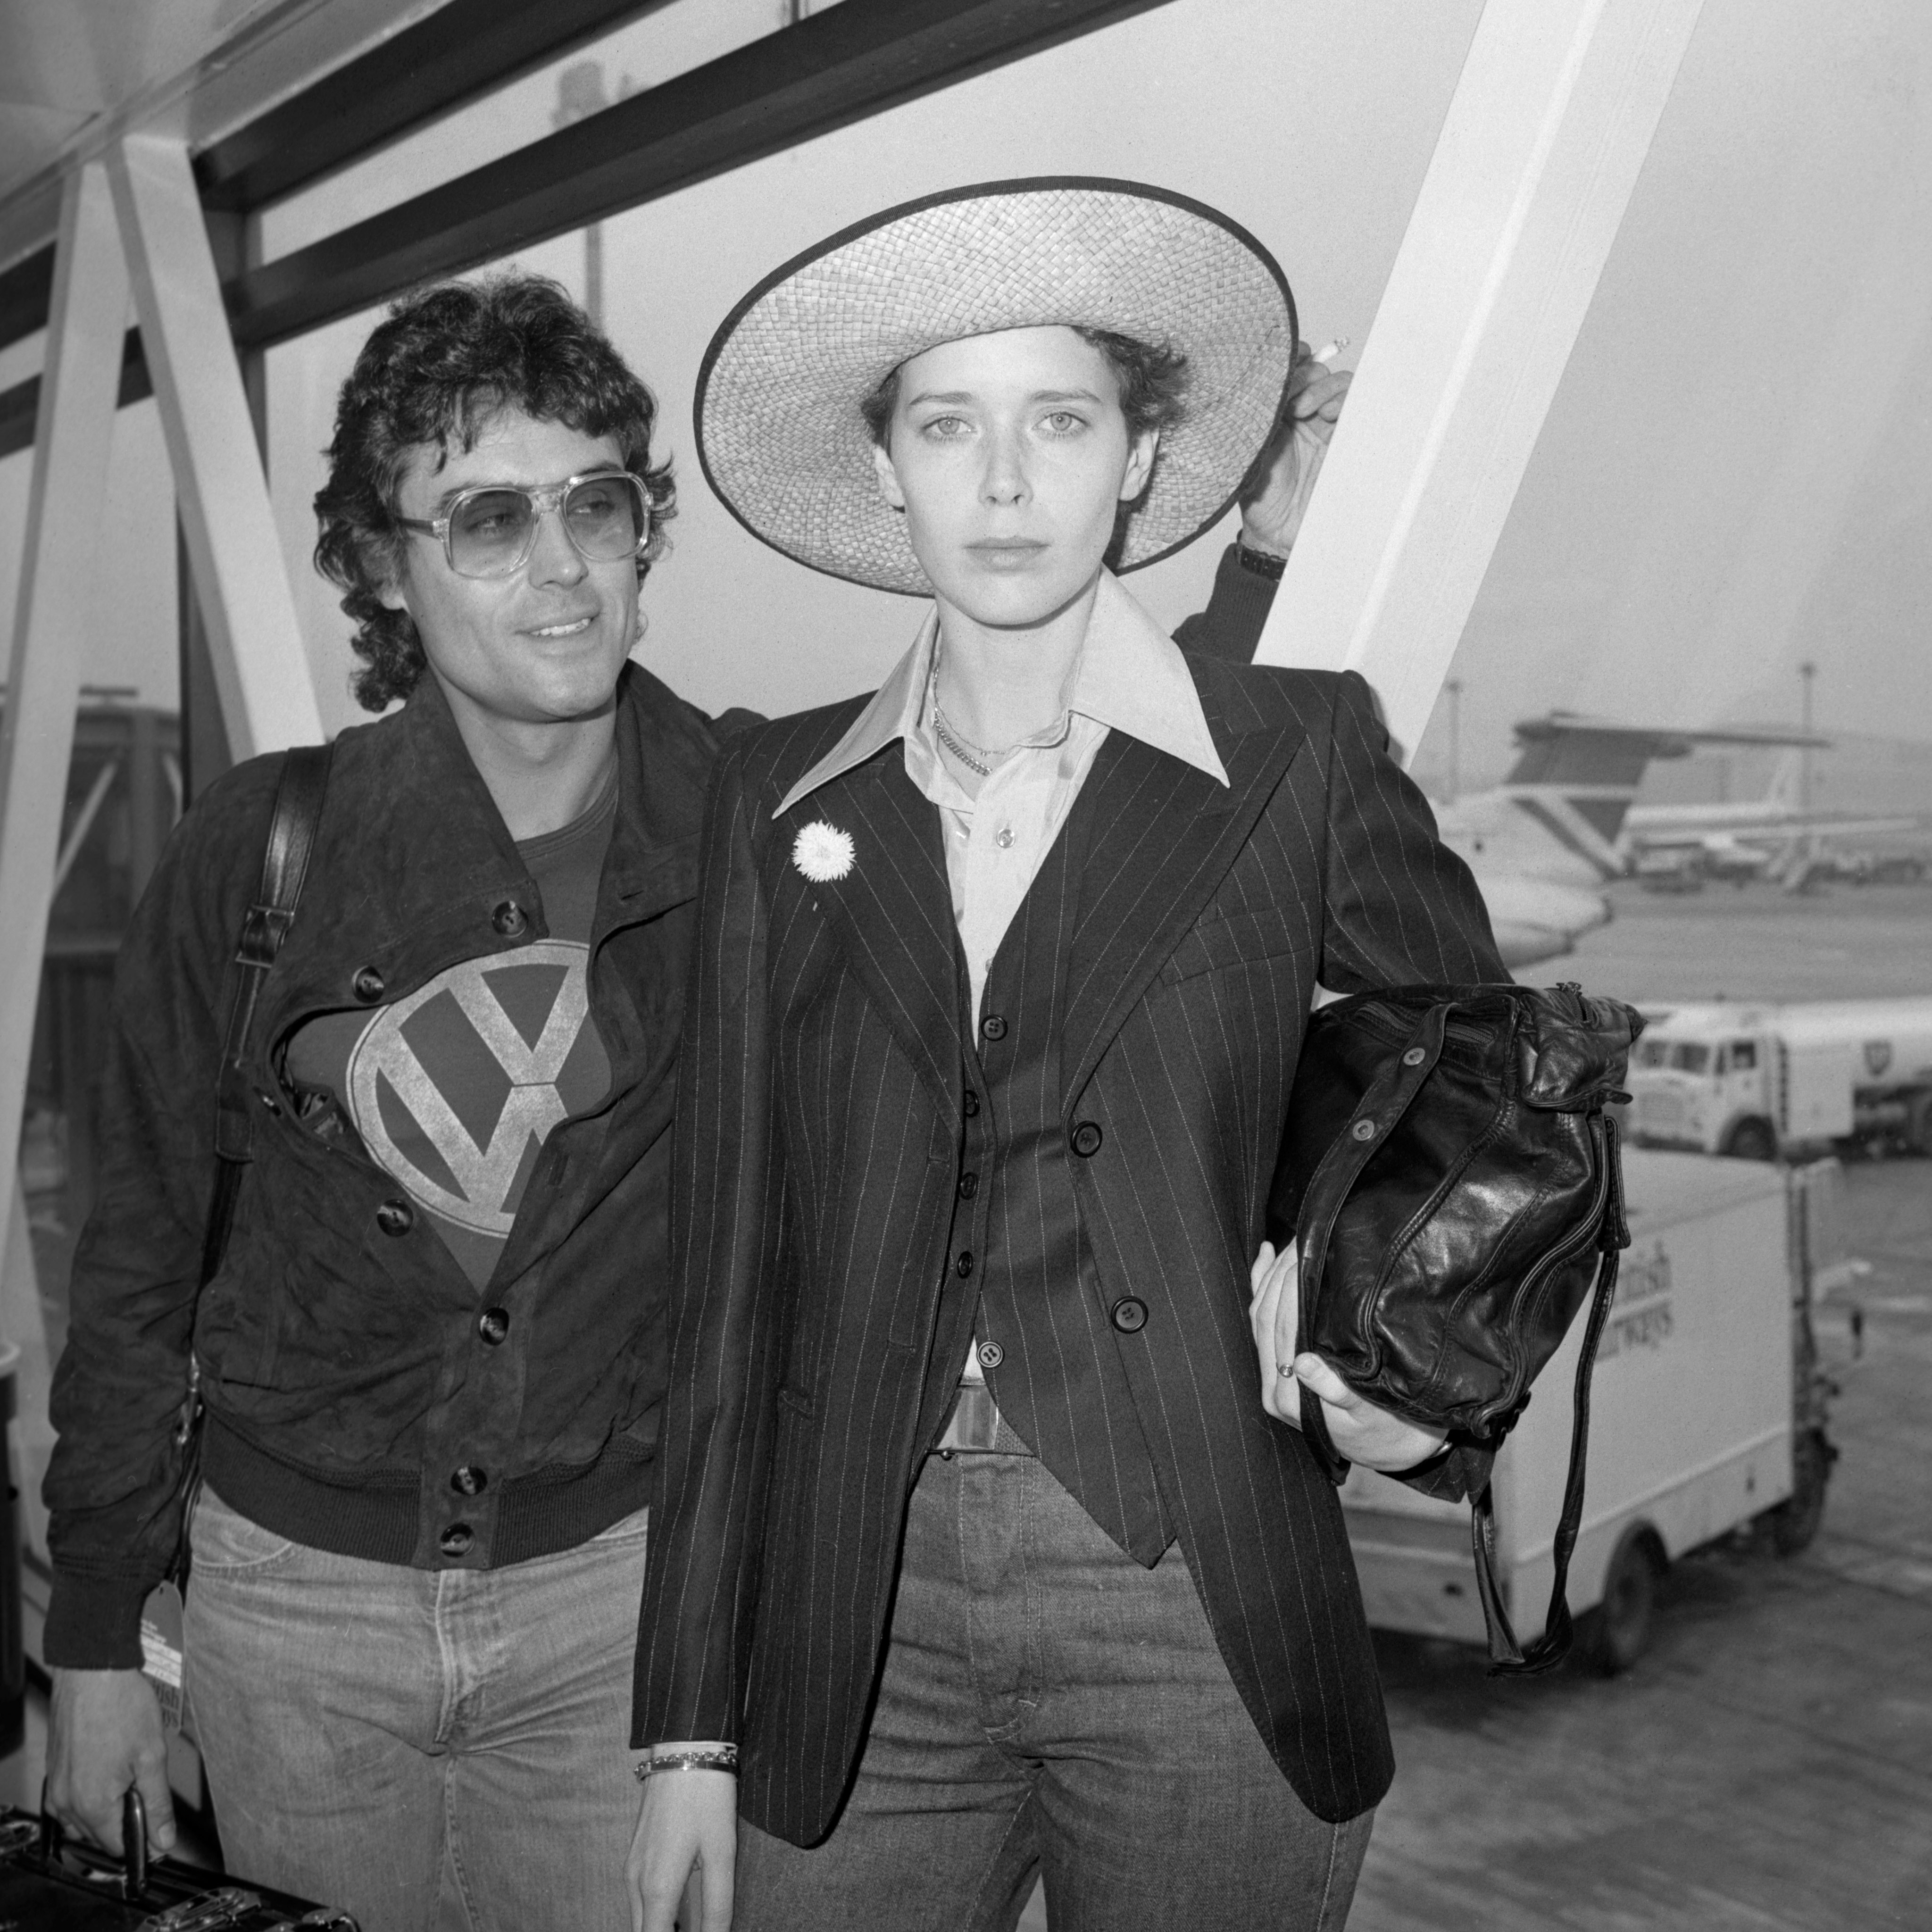 Ian McShane and his Dutch actress and model girlfriend Sylvia Kristel pose at London Heathrow Airport on June 13, 1977 in London | Source: Getty Images